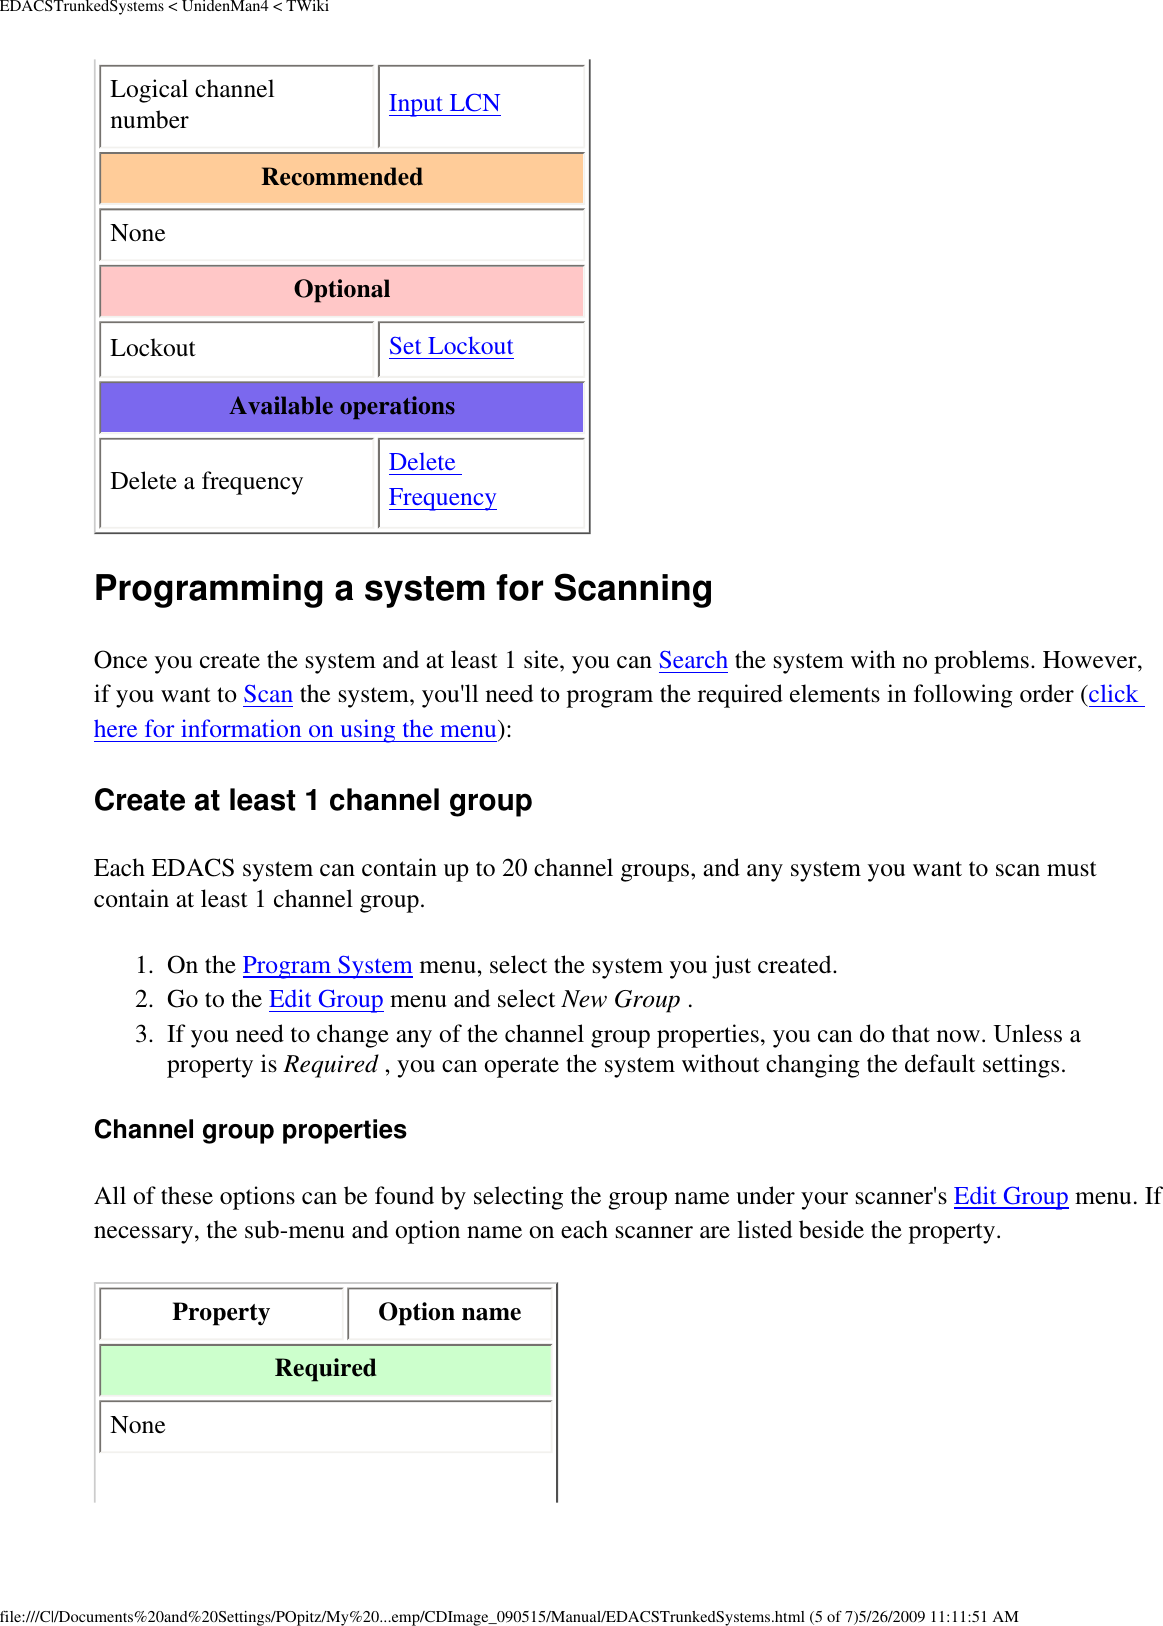 EDACSTrunkedSystems &lt; UnidenMan4 &lt; TWikiLogical channel number  Input LCN Recommended None Optional Lockout  Set Lockout Available operations Delete a frequency  Delete Frequency Programming a system for Scanning Once you create the system and at least 1 site, you can Search the system with no problems. However, if you want to Scan the system, you&apos;ll need to program the required elements in following order (click here for information on using the menu): Create at least 1 channel group Each EDACS system can contain up to 20 channel groups, and any system you want to scan must contain at least 1 channel group. 1.  On the Program System menu, select the system you just created. 2.  Go to the Edit Group menu and select New Group . 3.  If you need to change any of the channel group properties, you can do that now. Unless a property is Required , you can operate the system without changing the default settings. Channel group properties All of these options can be found by selecting the group name under your scanner&apos;s Edit Group menu. If necessary, the sub-menu and option name on each scanner are listed beside the property. Property  Option name Required None file:///C|/Documents%20and%20Settings/POpitz/My%20...emp/CDImage_090515/Manual/EDACSTrunkedSystems.html (5 of 7)5/26/2009 11:11:51 AM